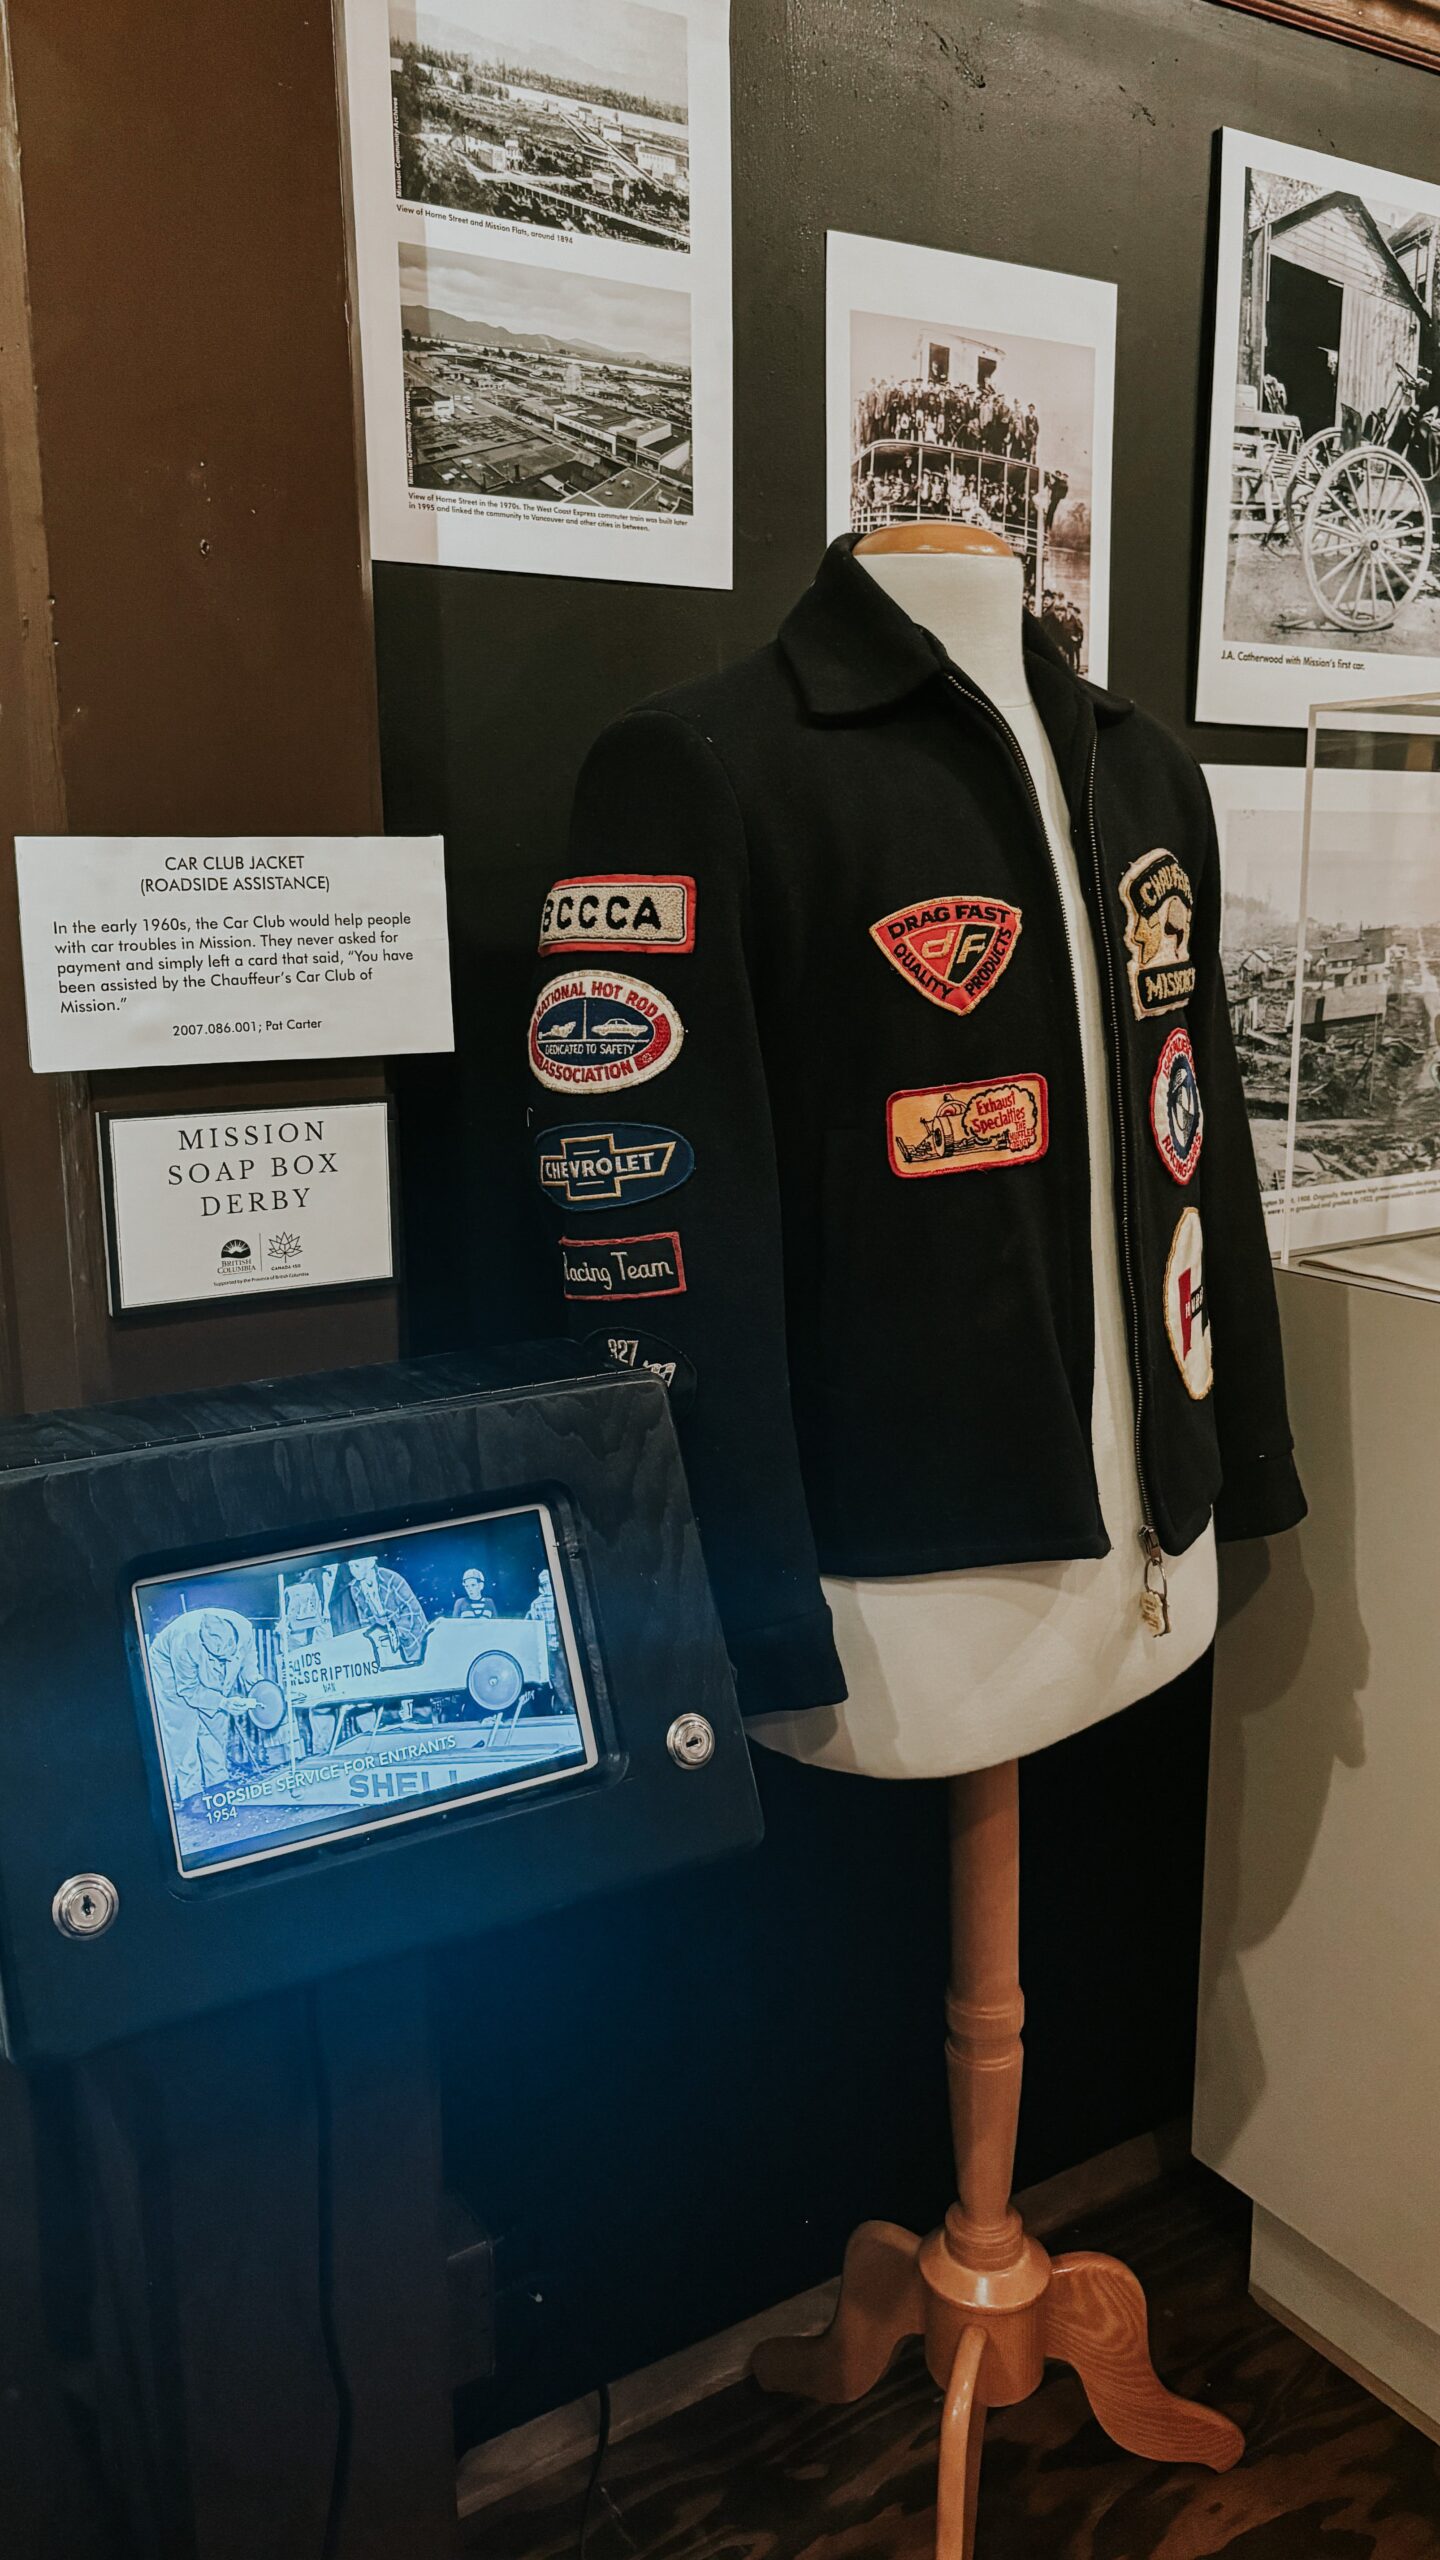 A collection of jackets and other items on display in a museum showcasing history.